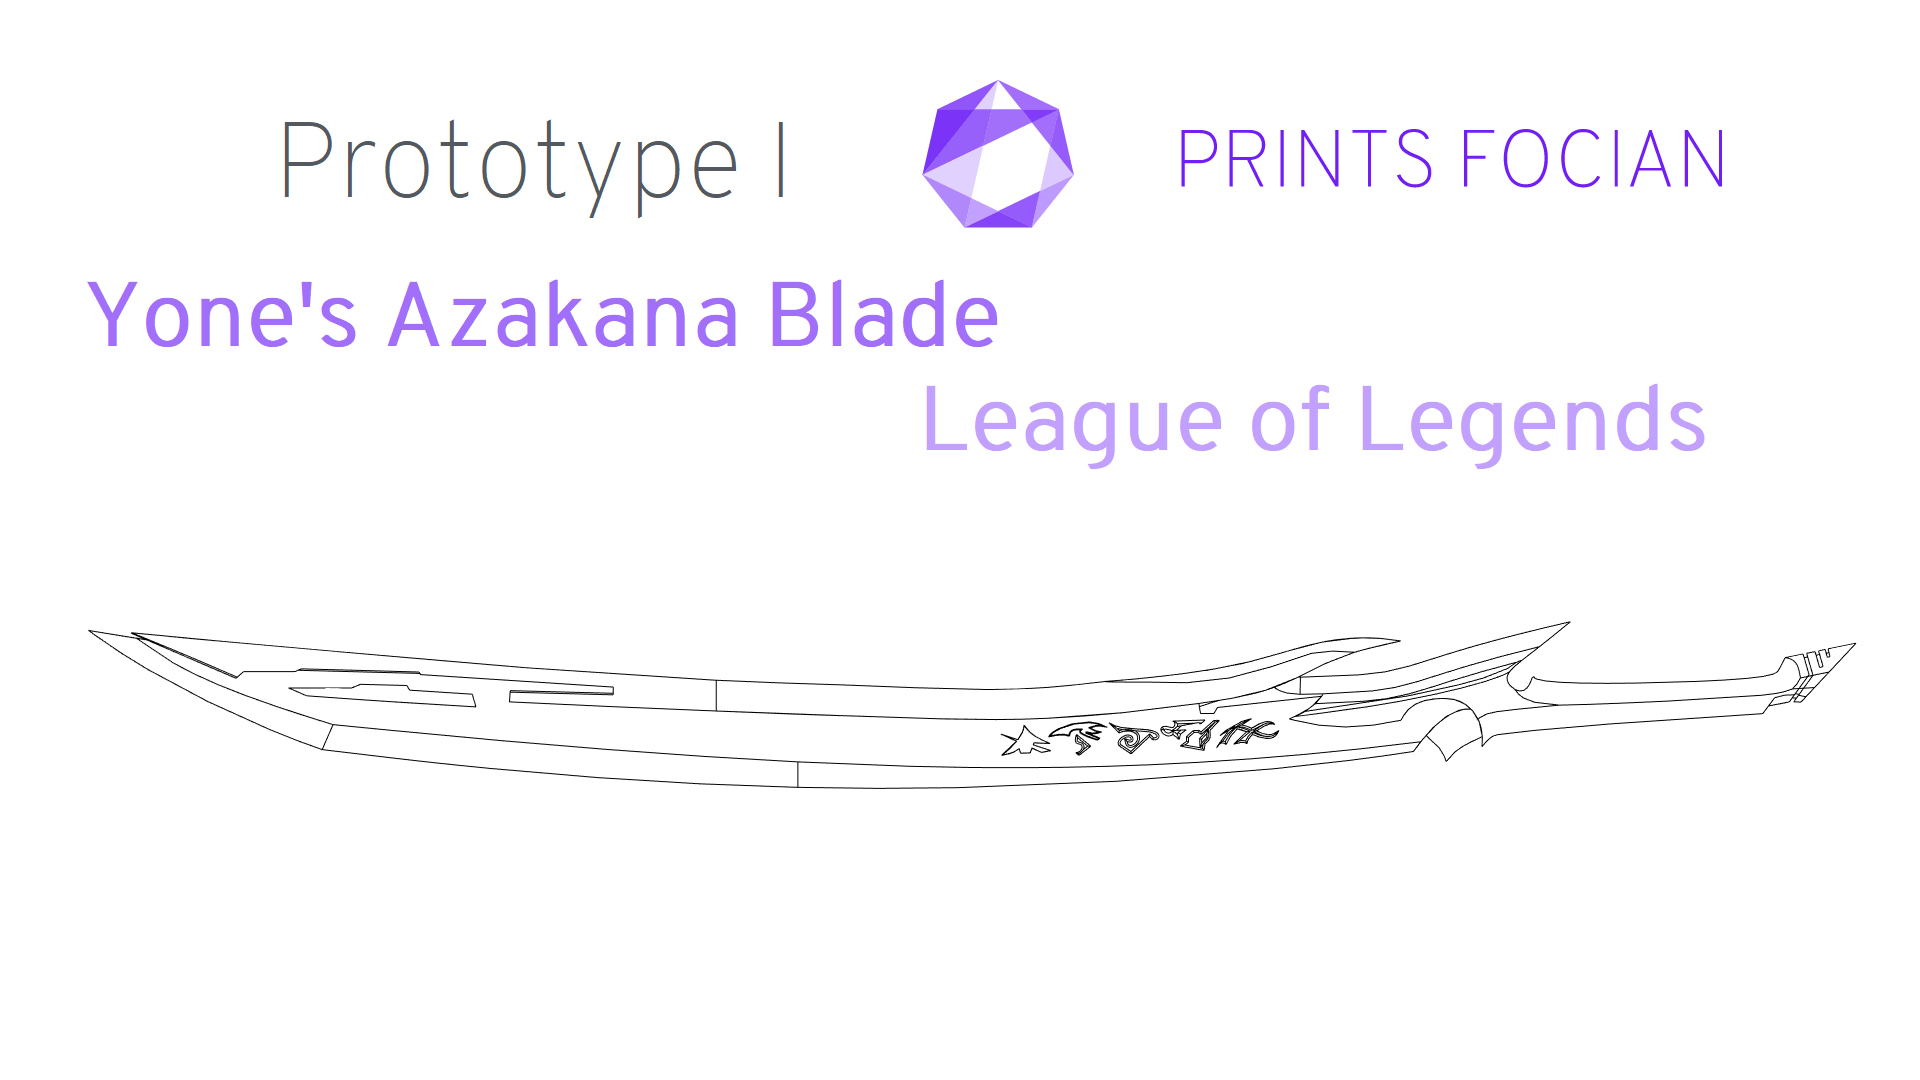 Wireframe image of Yones Azakana Sword on a white background. Prints Focian Icon top and central. Text: Purple Prints Focian, Yones Azakana Blade and League of Legends. Dark grey text Prototype I